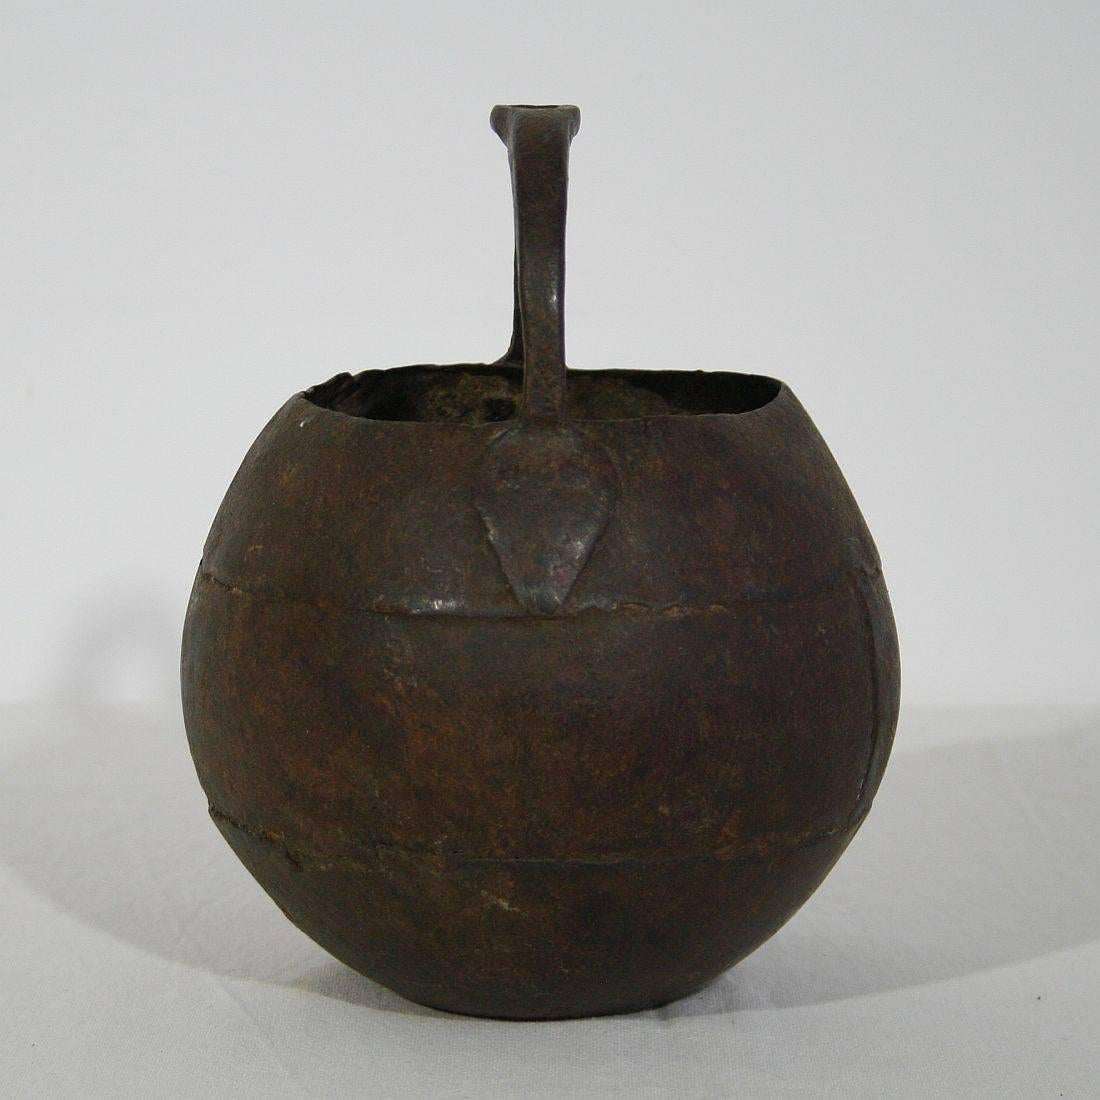 18th Century and Earlier Primitive 18th Century Hand-Forged Iron Cooking Pot